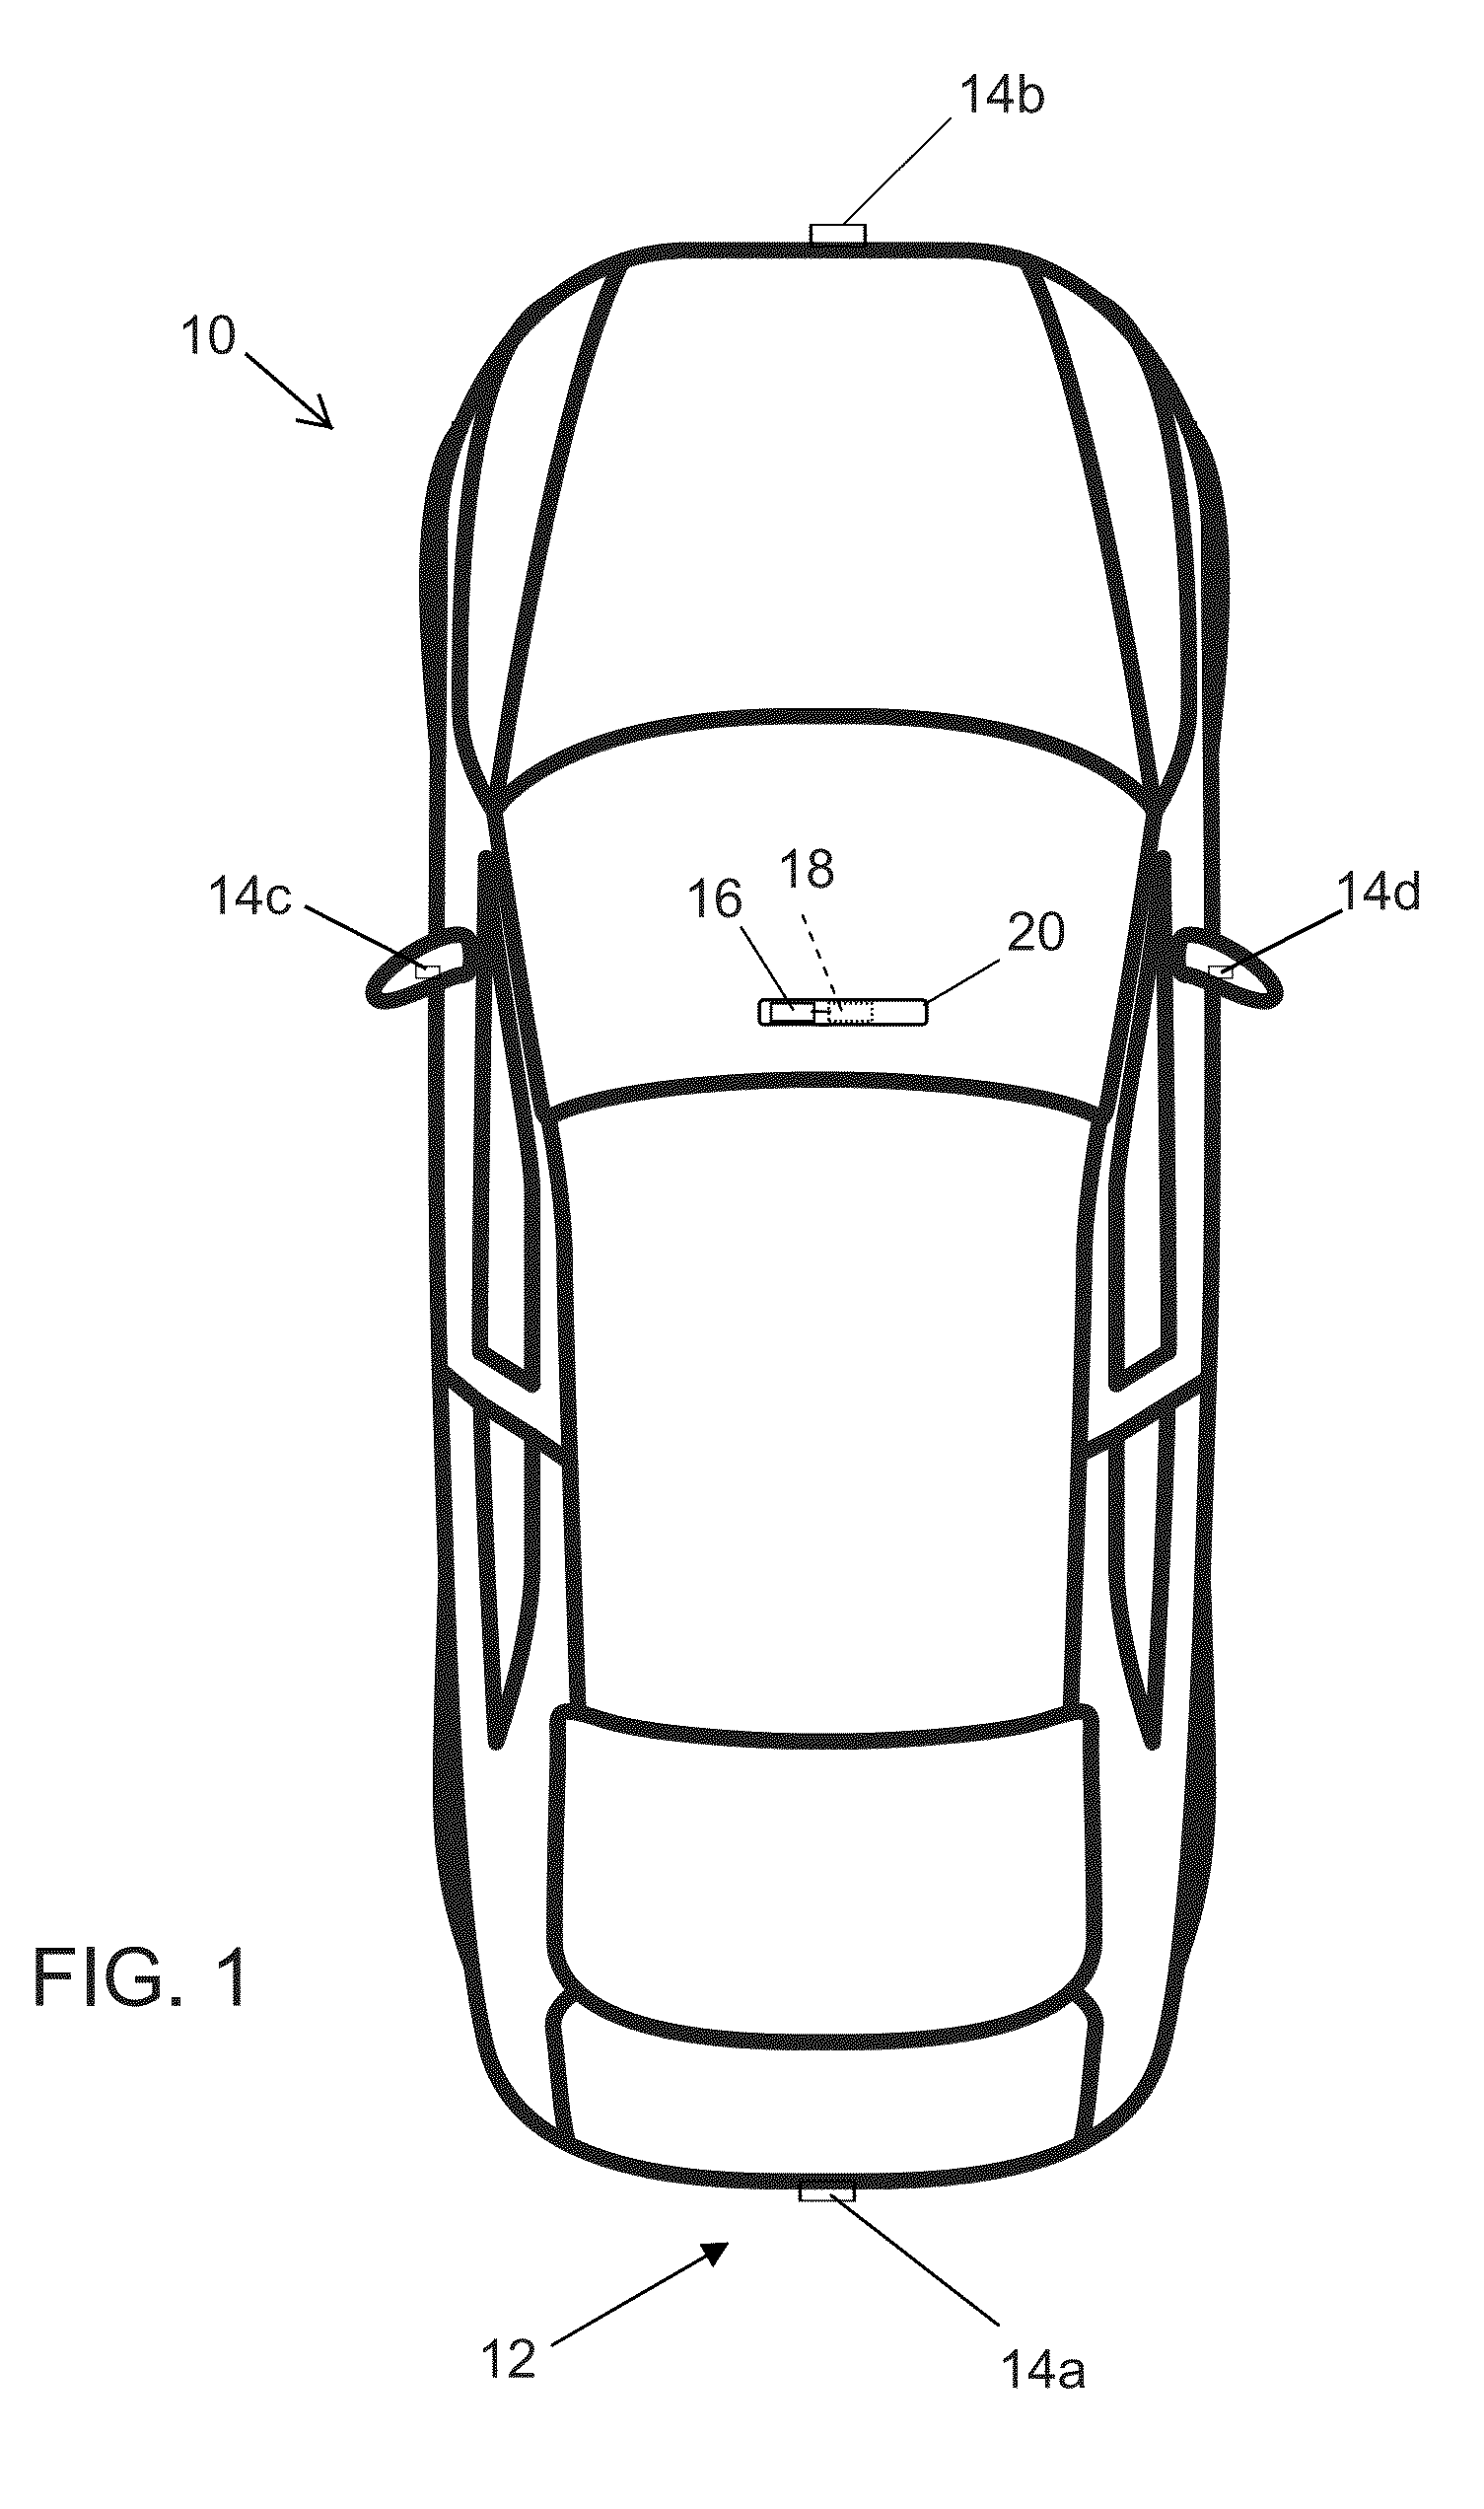 Vehicle camera with lens washer system